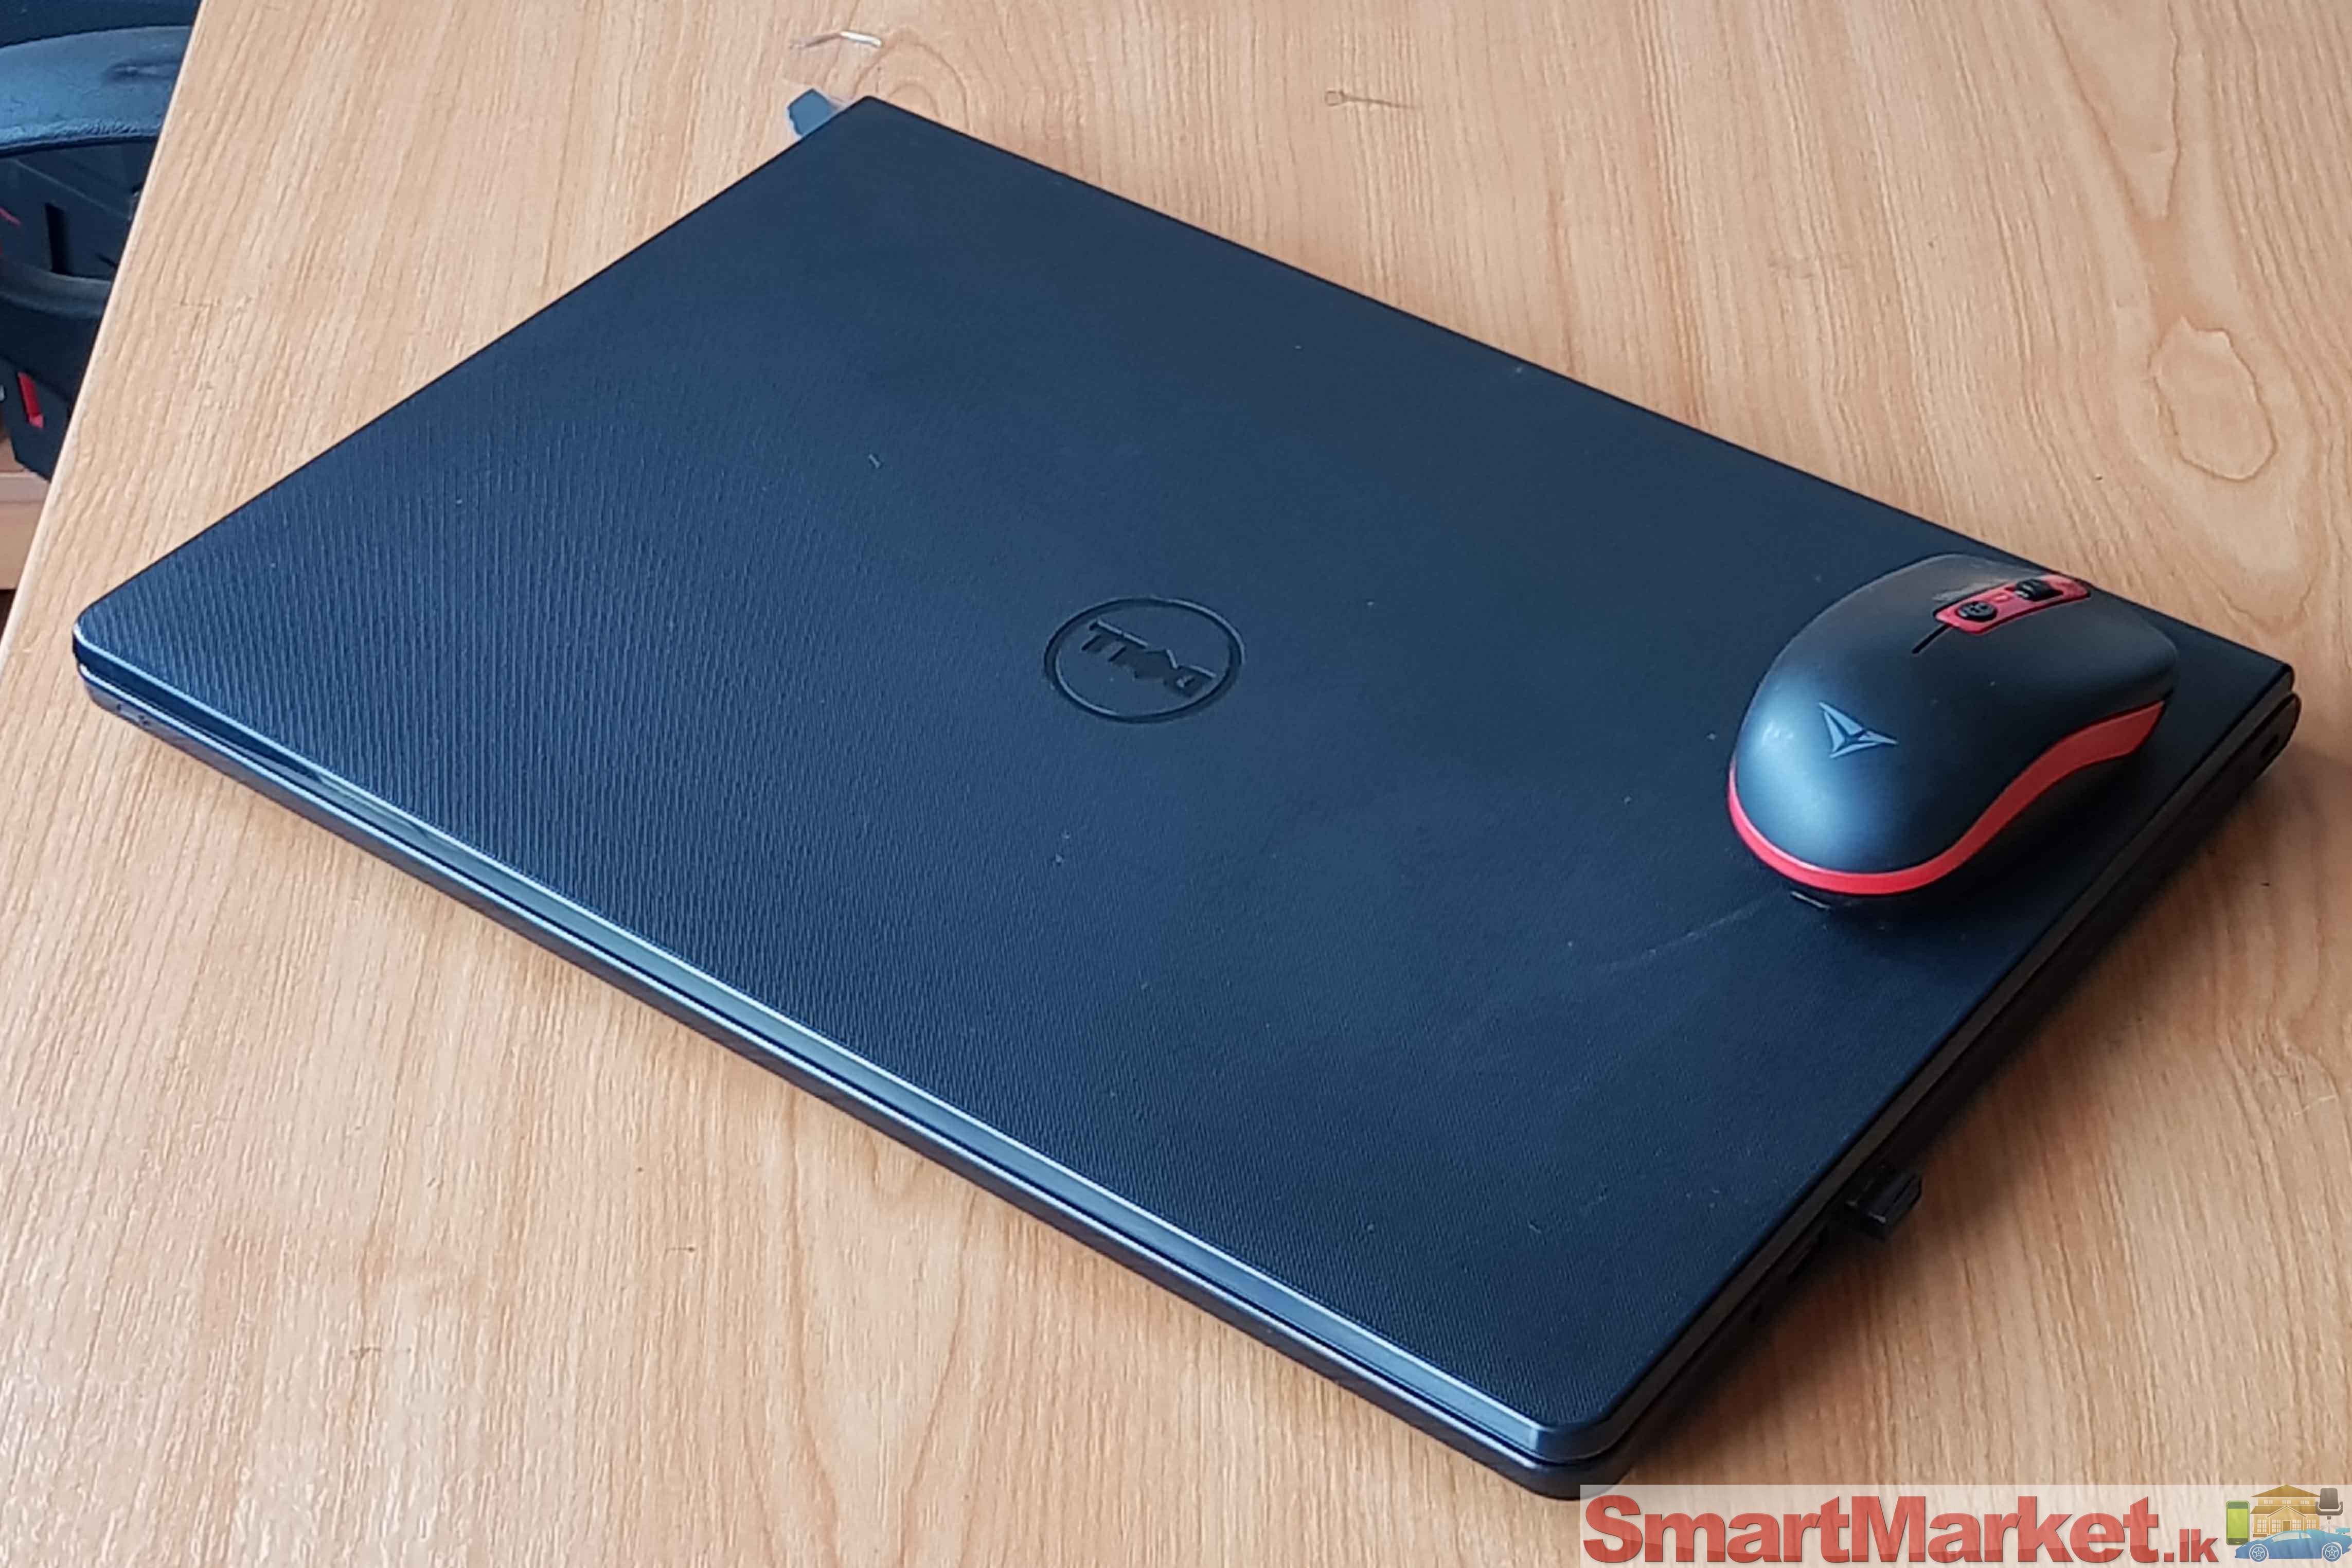 Dell Inspiron 15 5000 Series 15.6 Inch Laptop